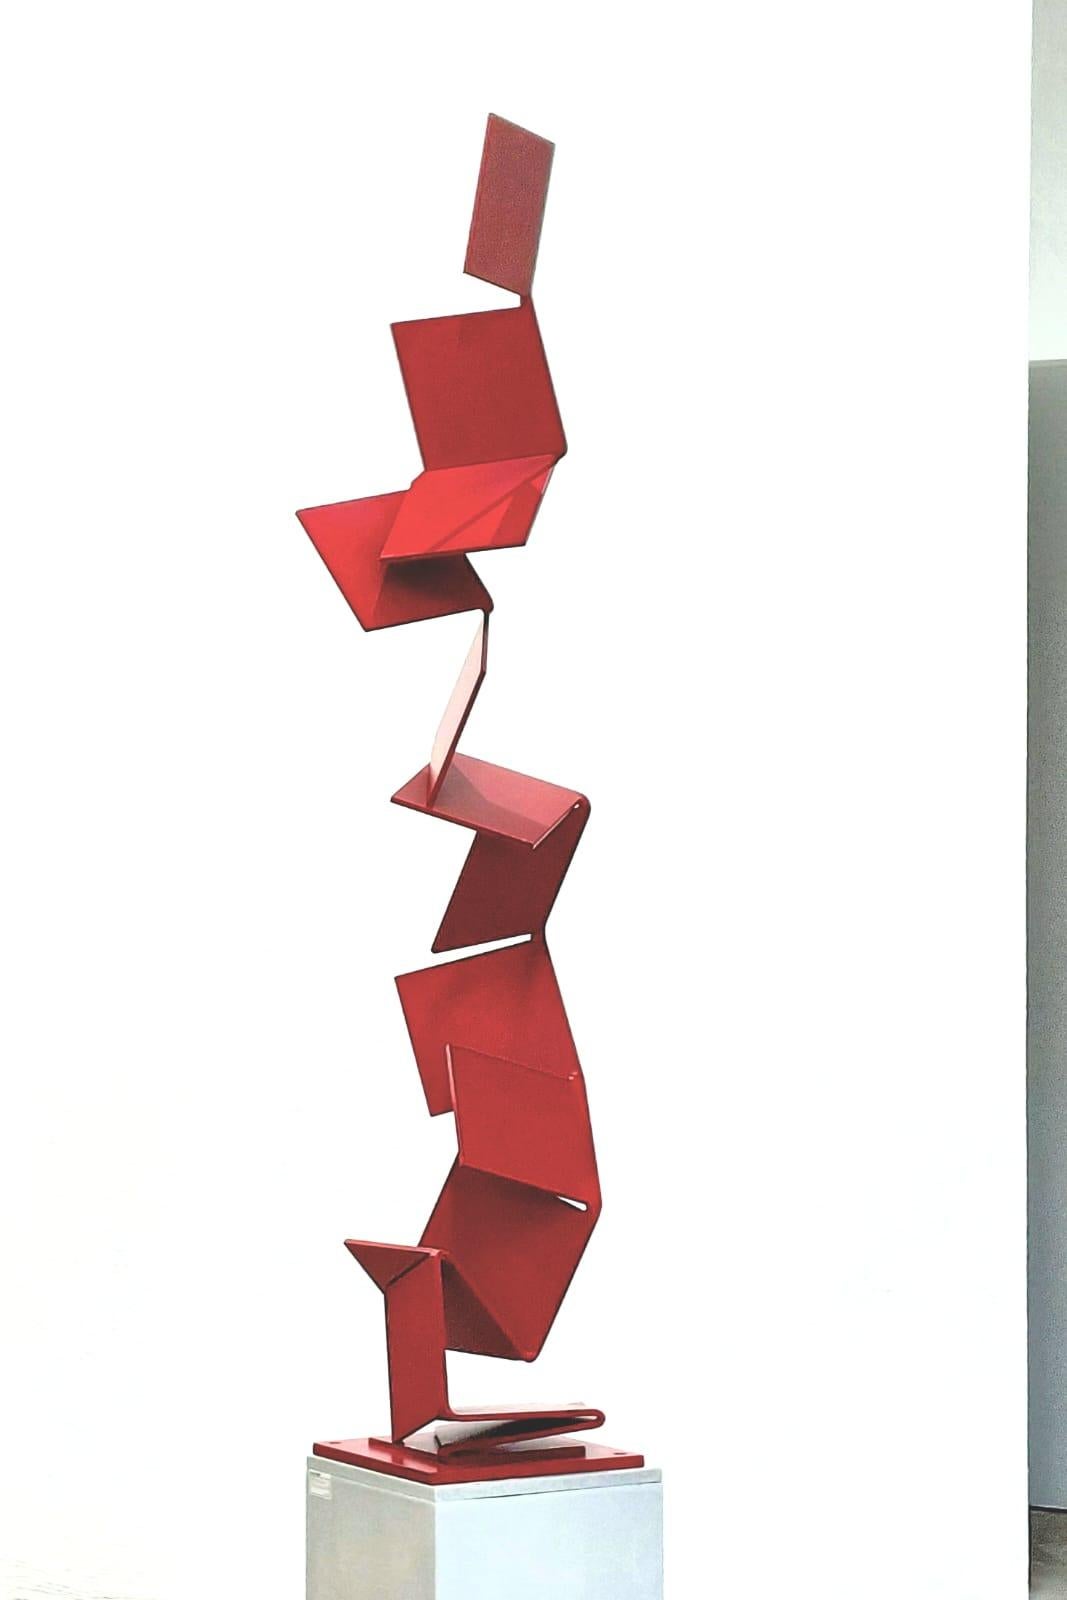 Aspire Upwards by Kuno Vollet - Contemporary Red Steel sculpture for Outdoors For Sale 1